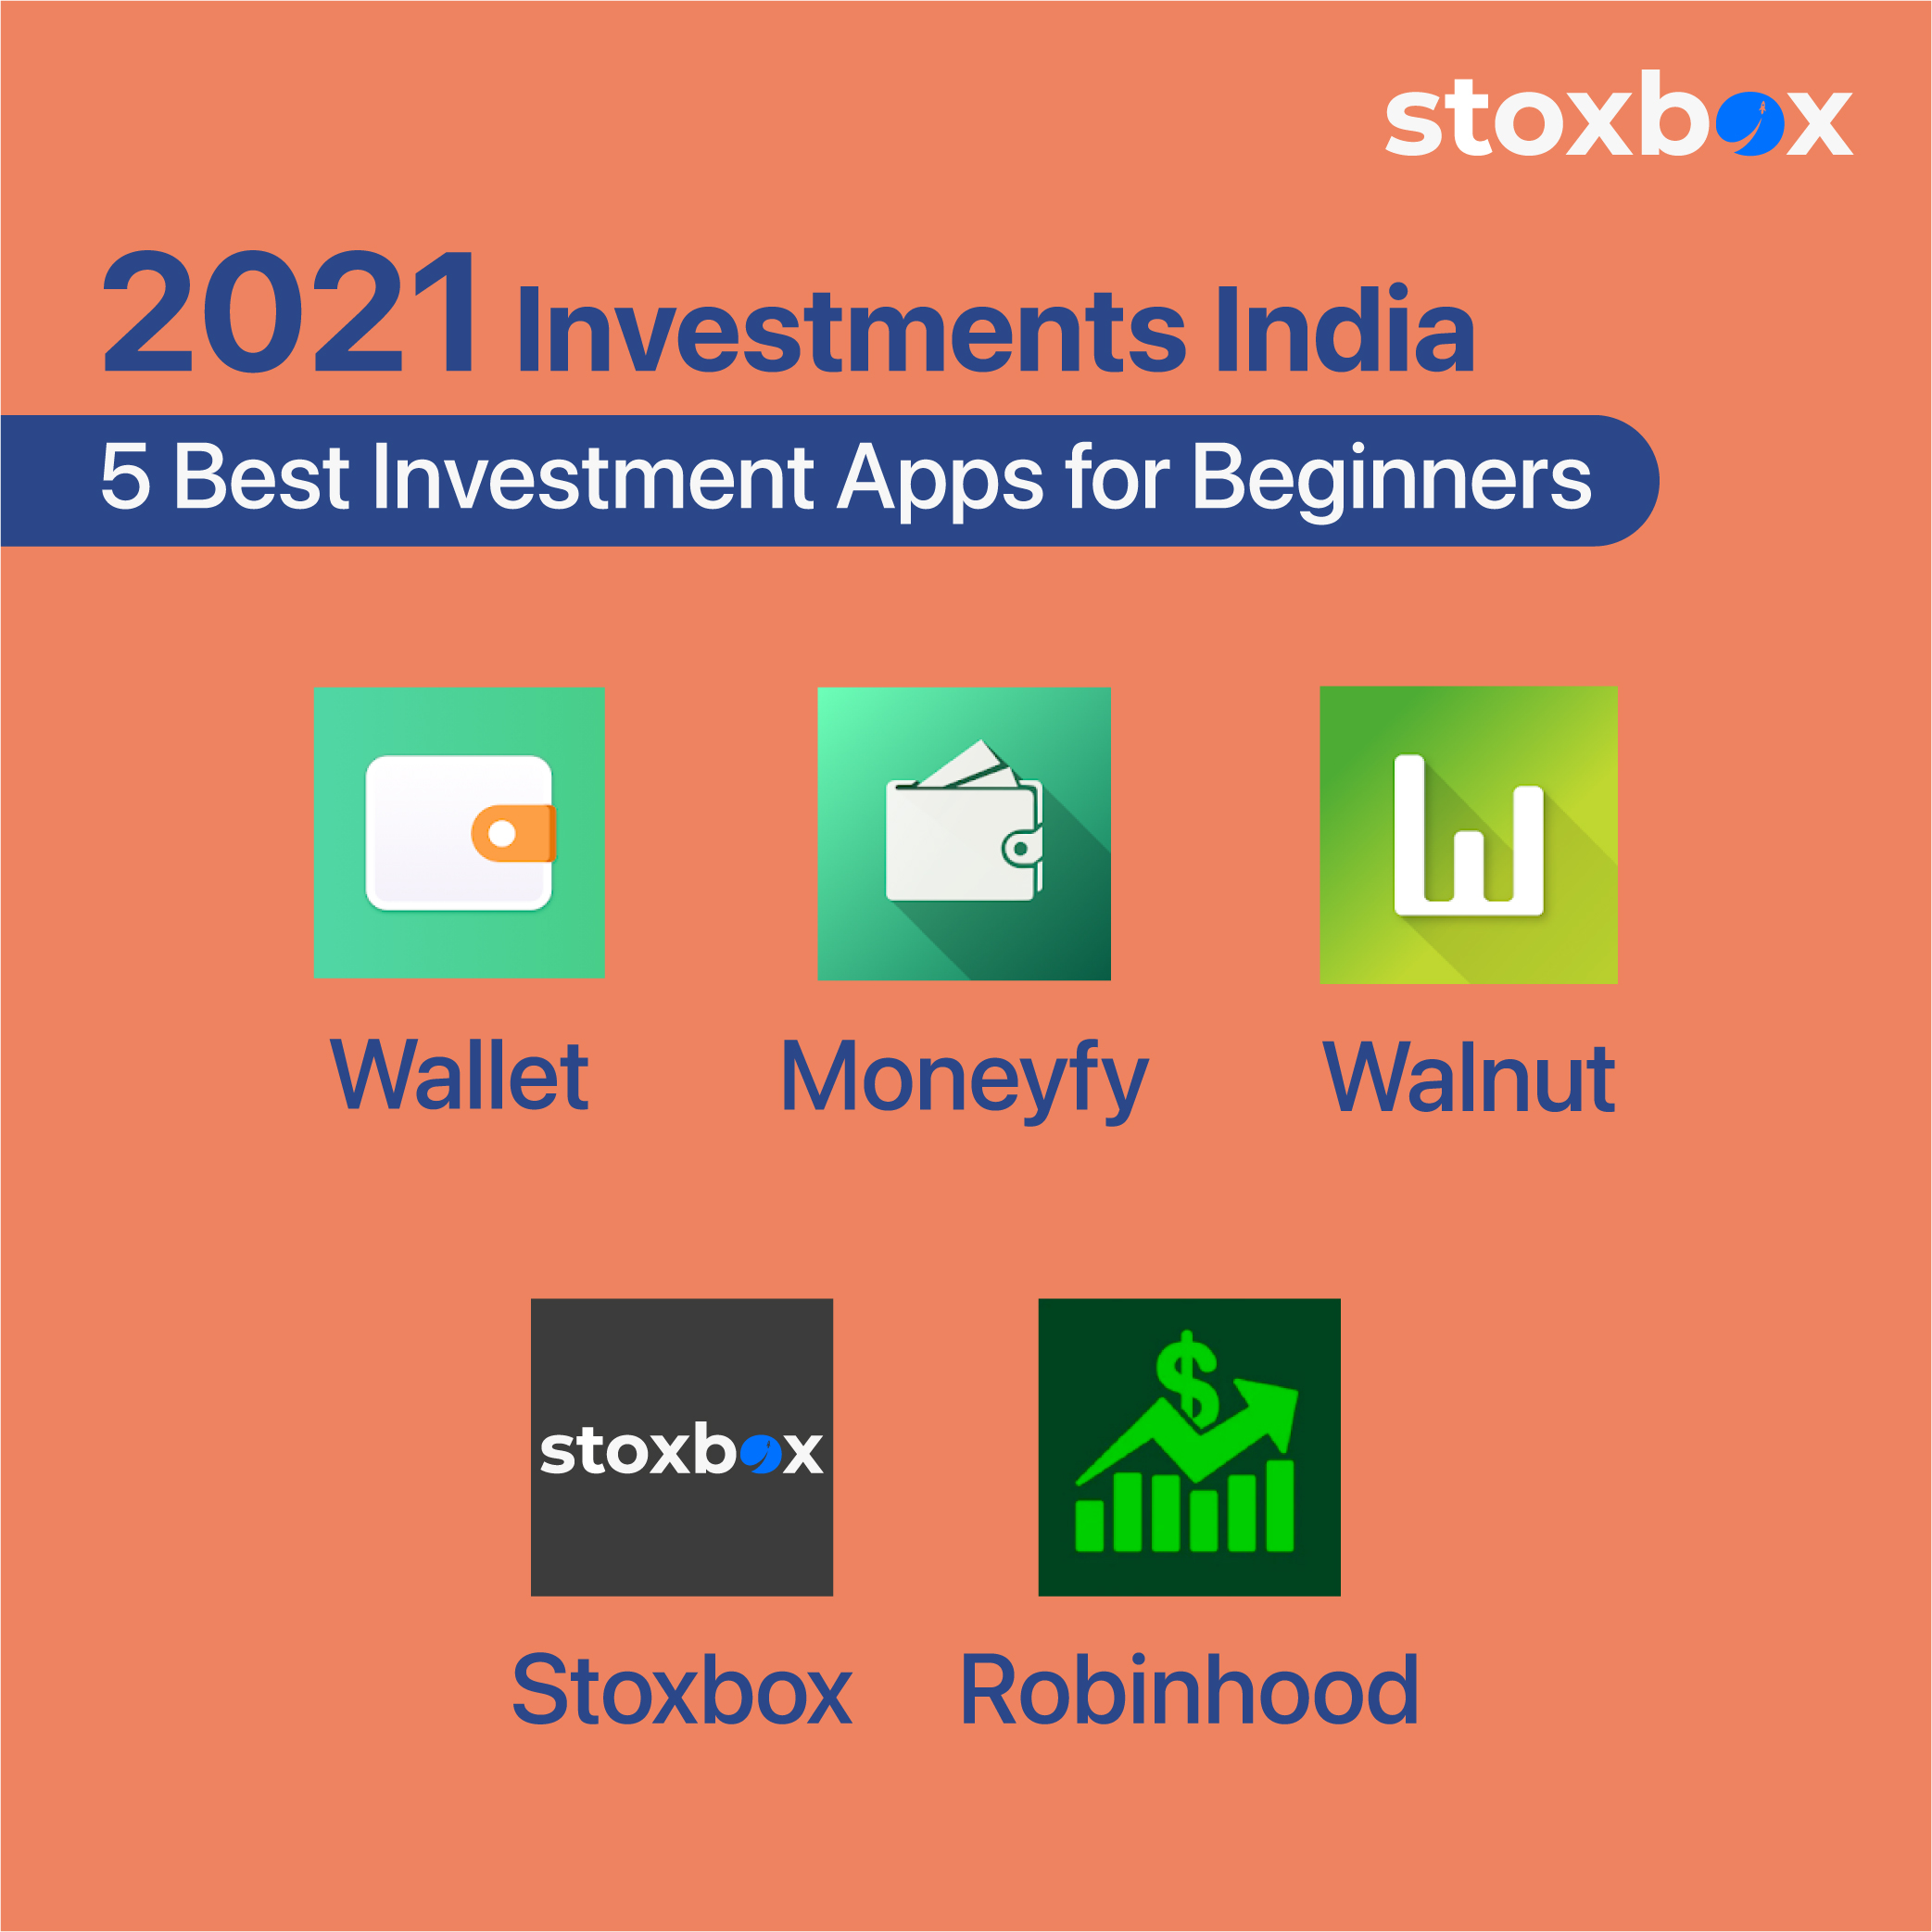 2021 Investments India—5 Best Investing Options and Apps for Beginners